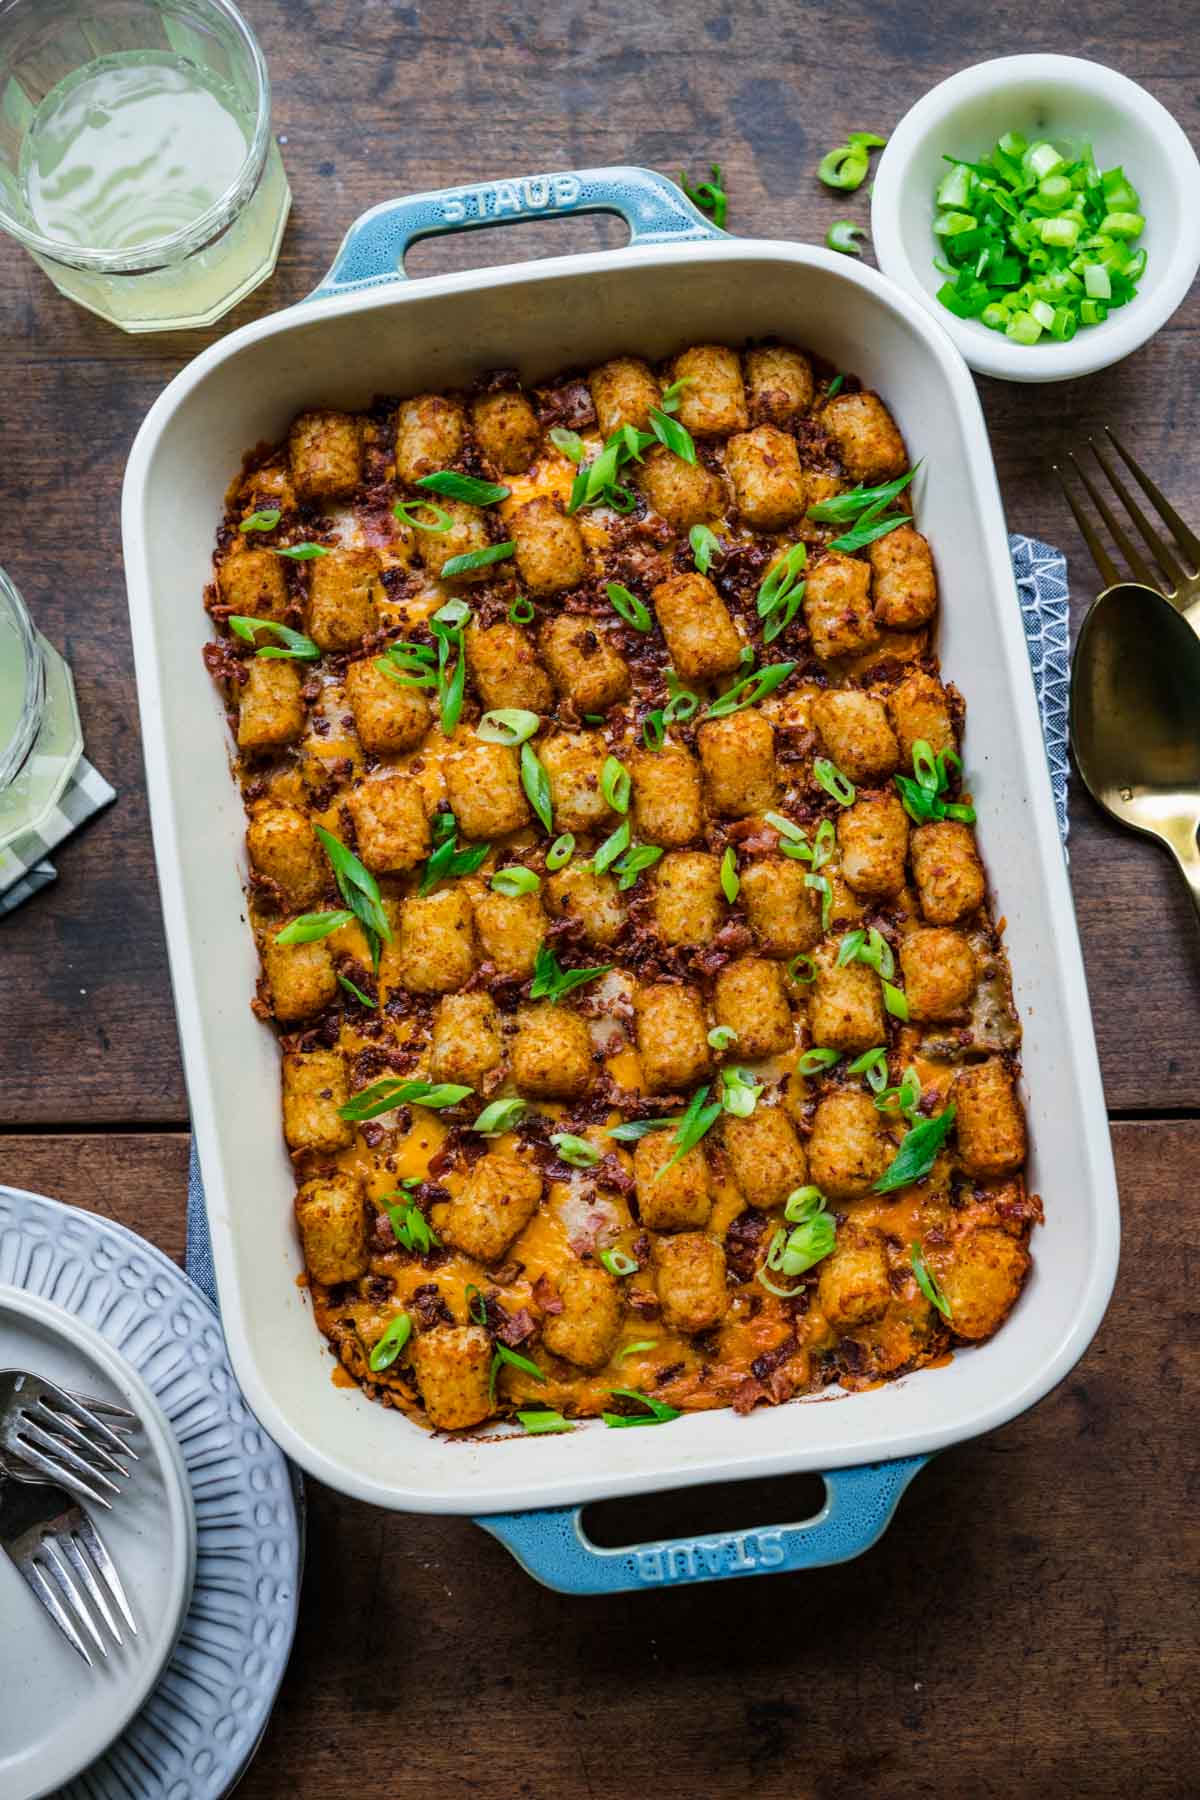 Finished Bacon Cheeseburger Tater Tot Casserole in 9x13 pan with bacon and green onions garnish